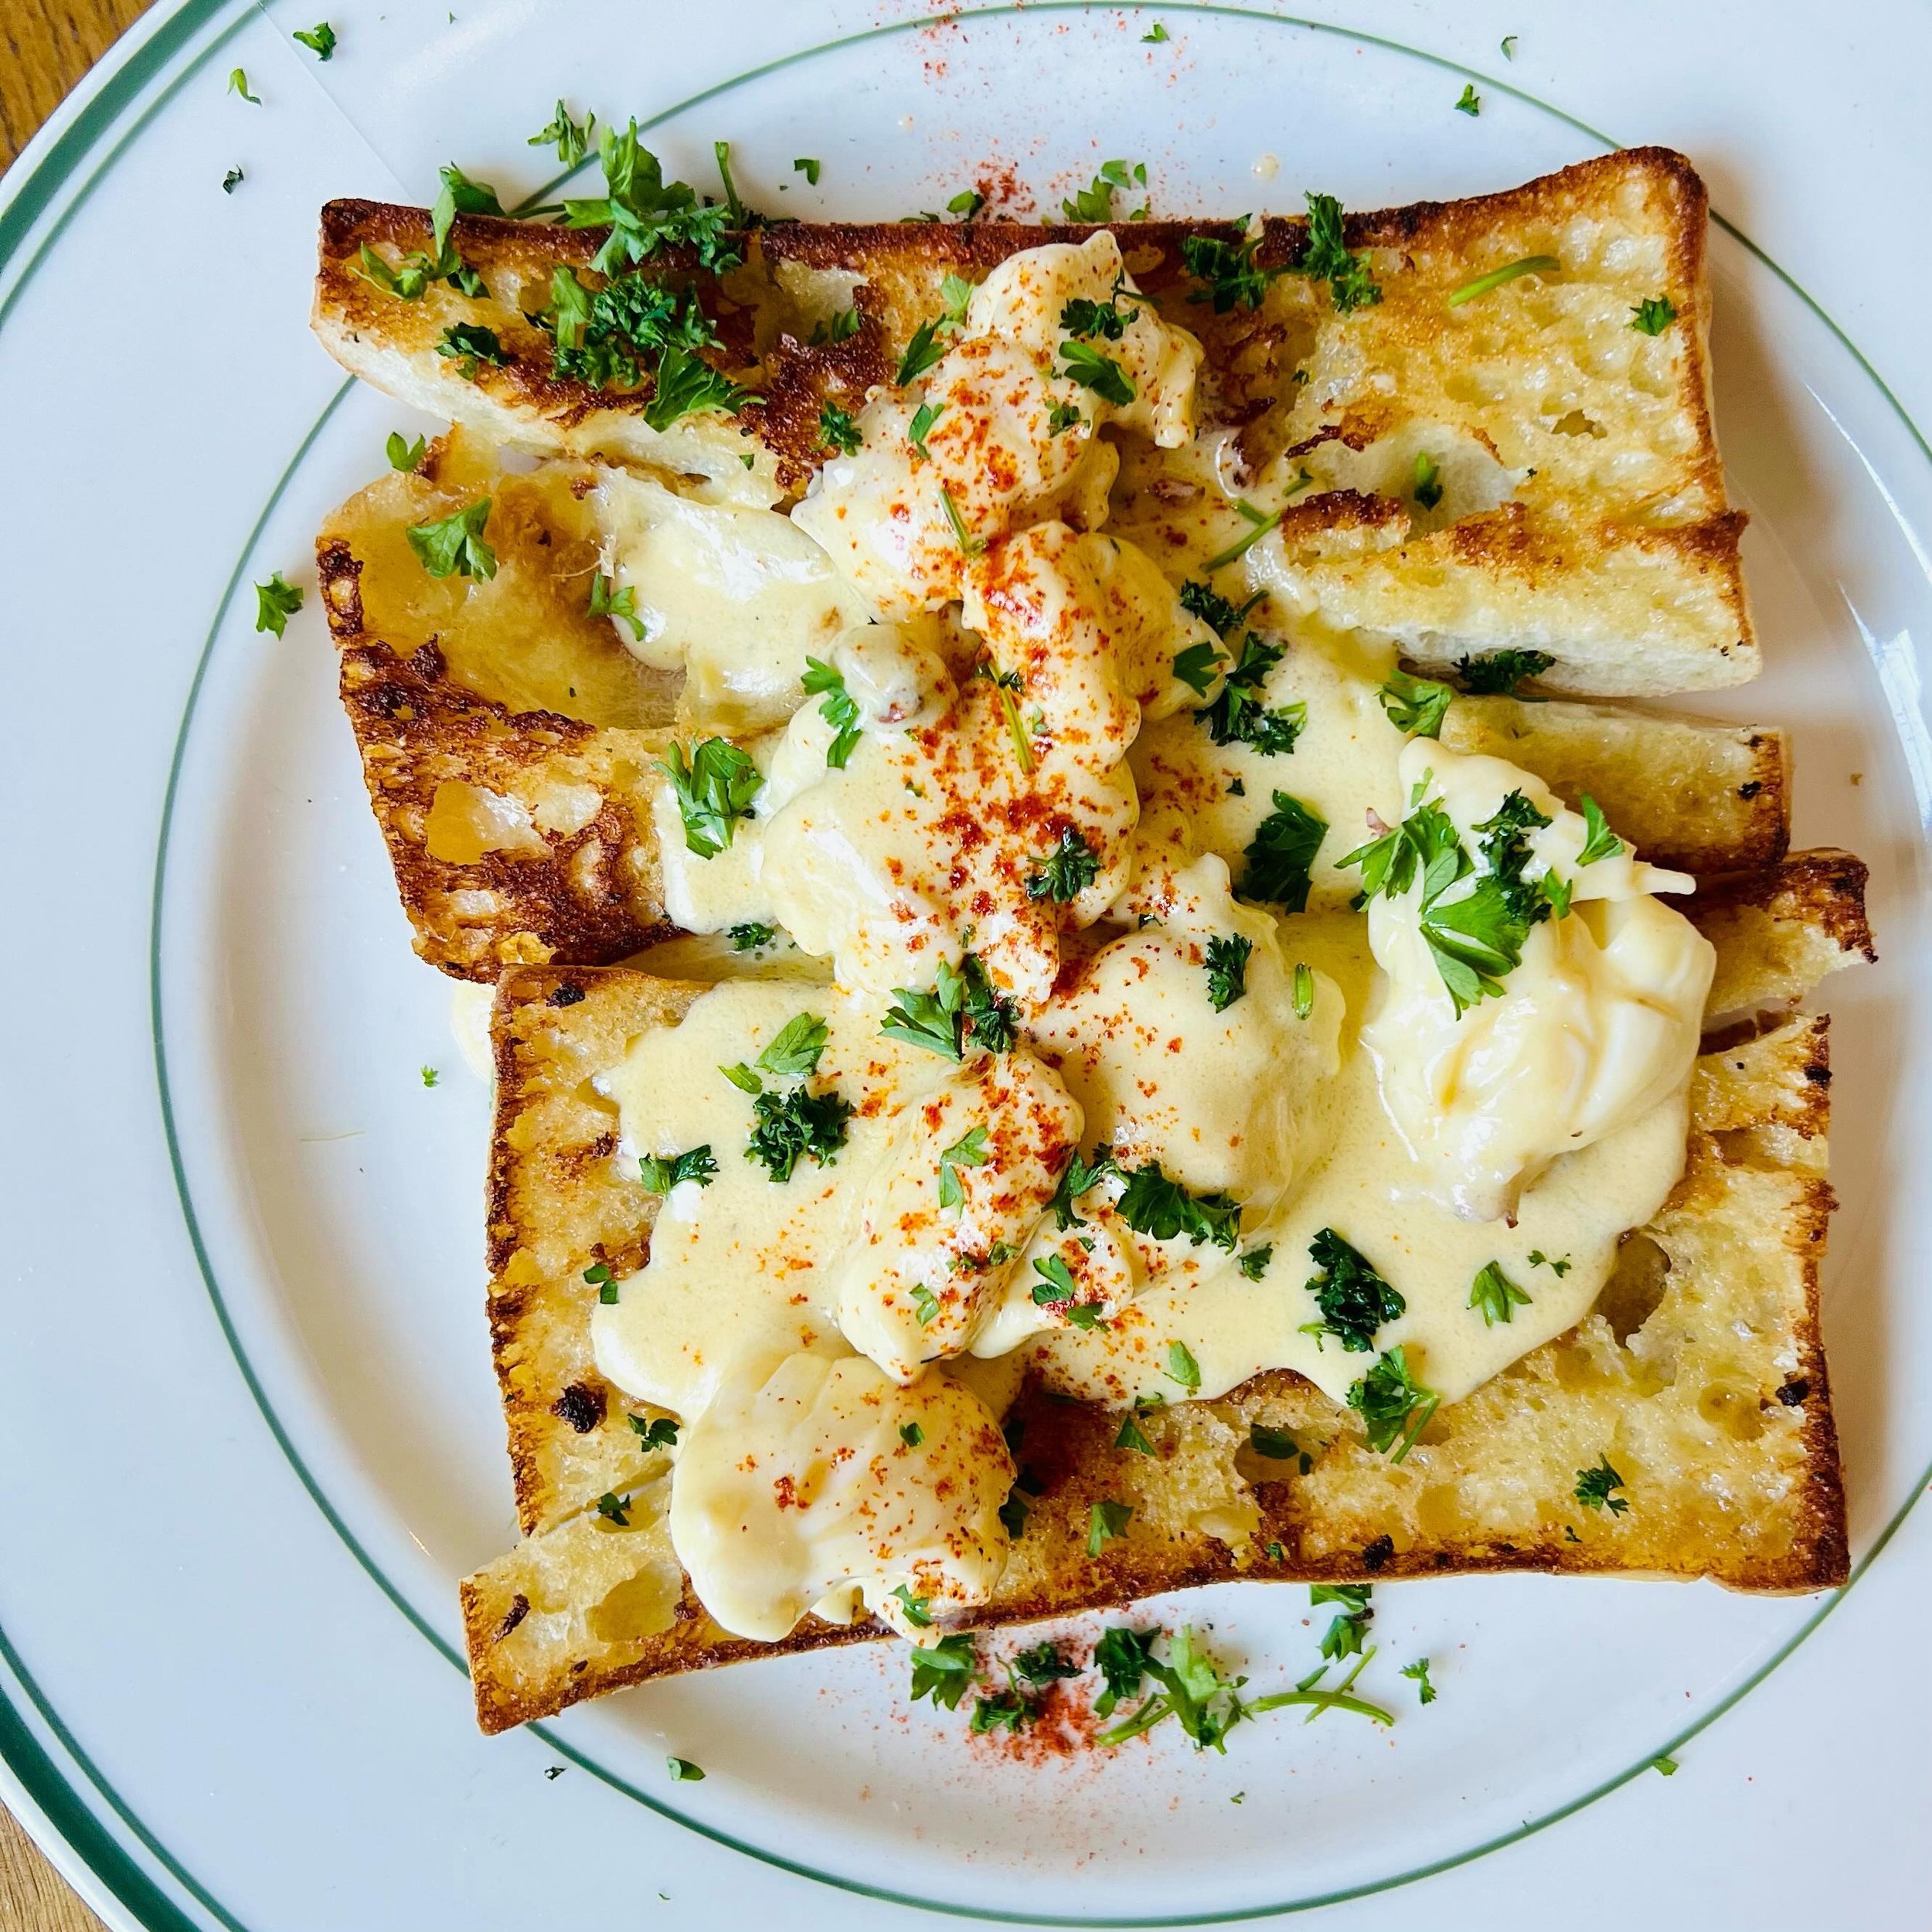 LOBSTER TOAST
Reimagines the classic Lobster Newburg, featuring succulent lobster saut&eacute;ed in butter and sherry. The lobster is then gently simmered in a luxuriously rich sauce made from egg yolks and cream. Served atop slices of crispy ciabatt